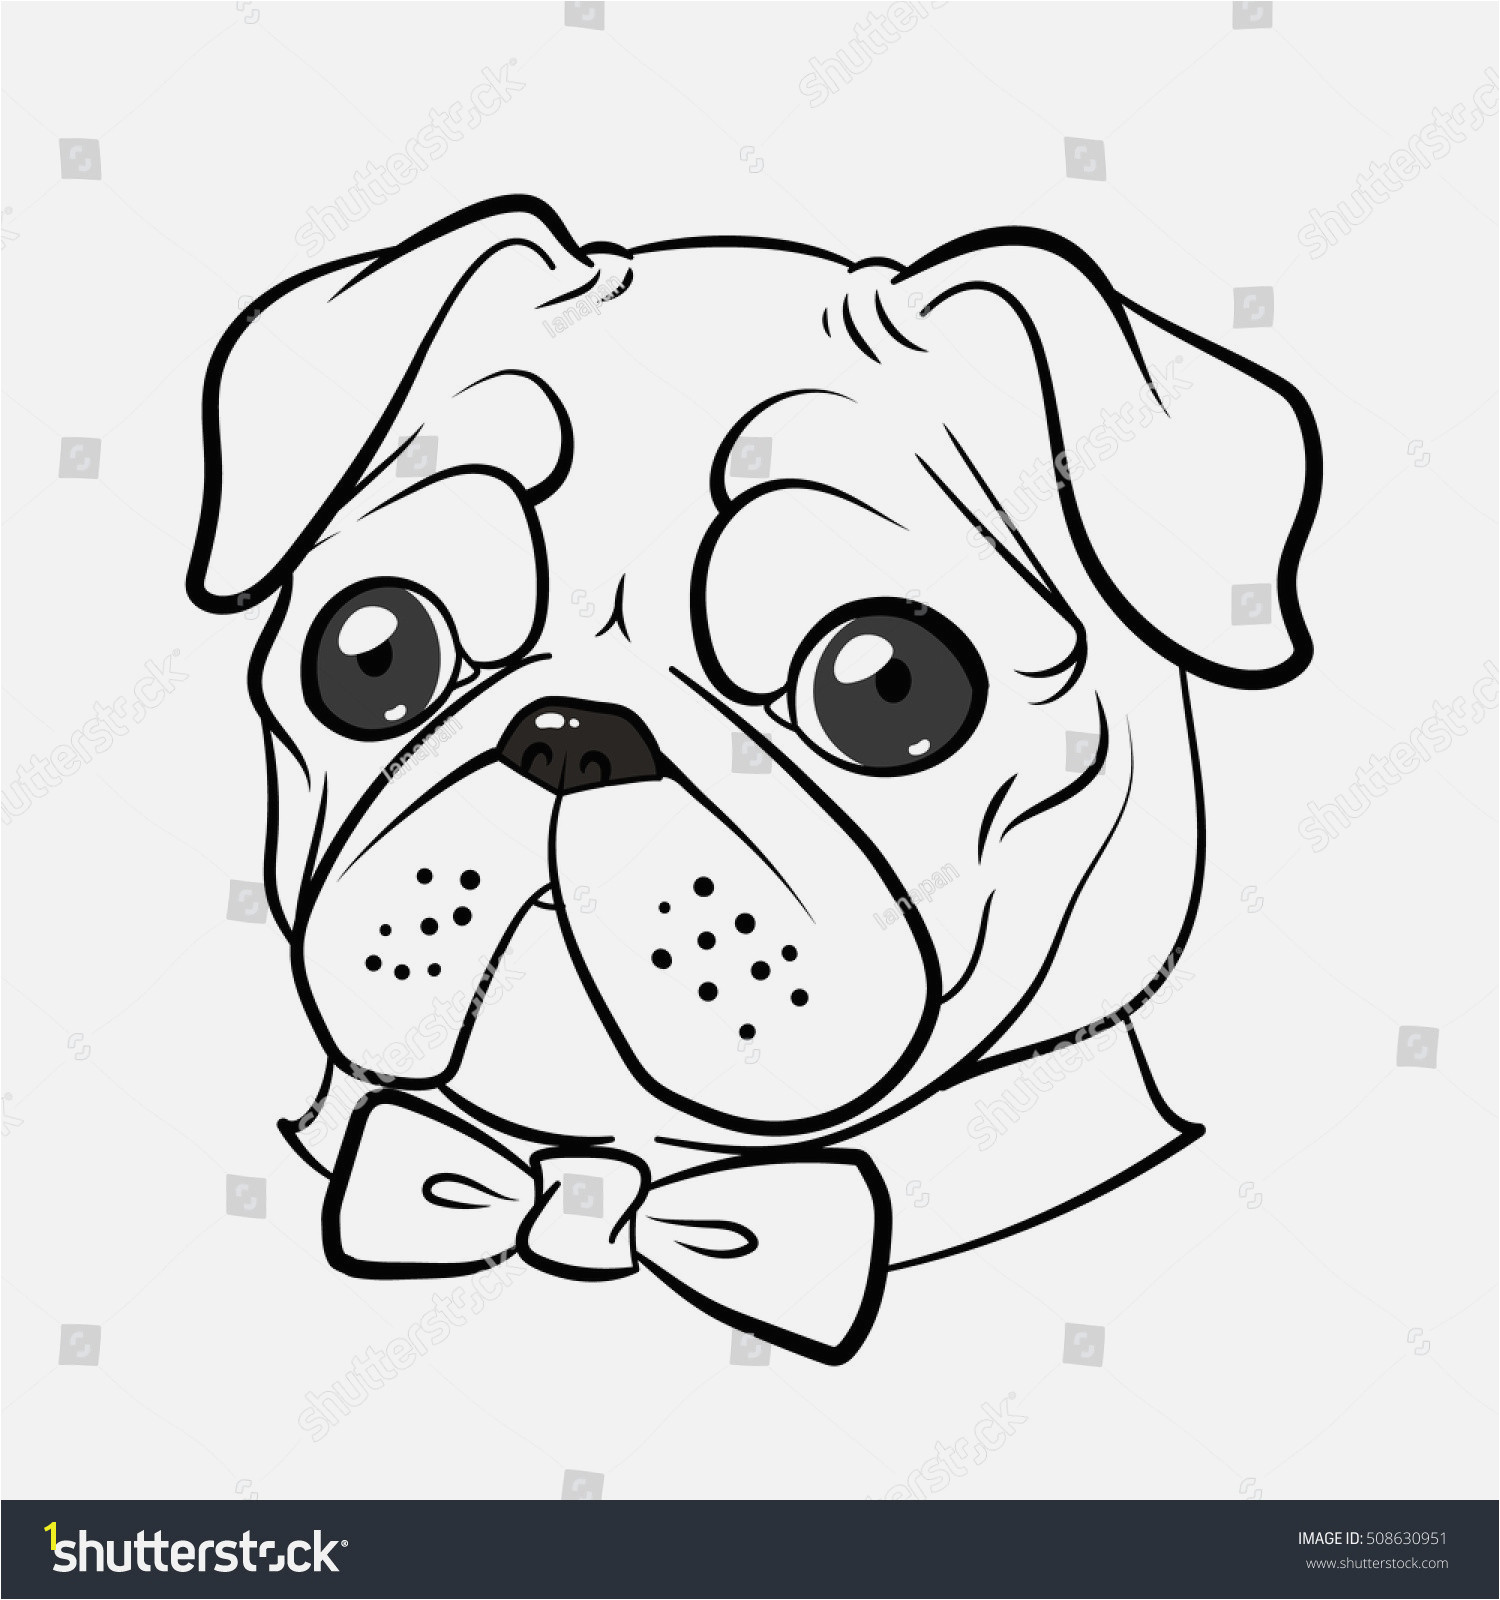 Pug Coloring Pages Printable 15 New Cute Pug Coloring Pages Collection